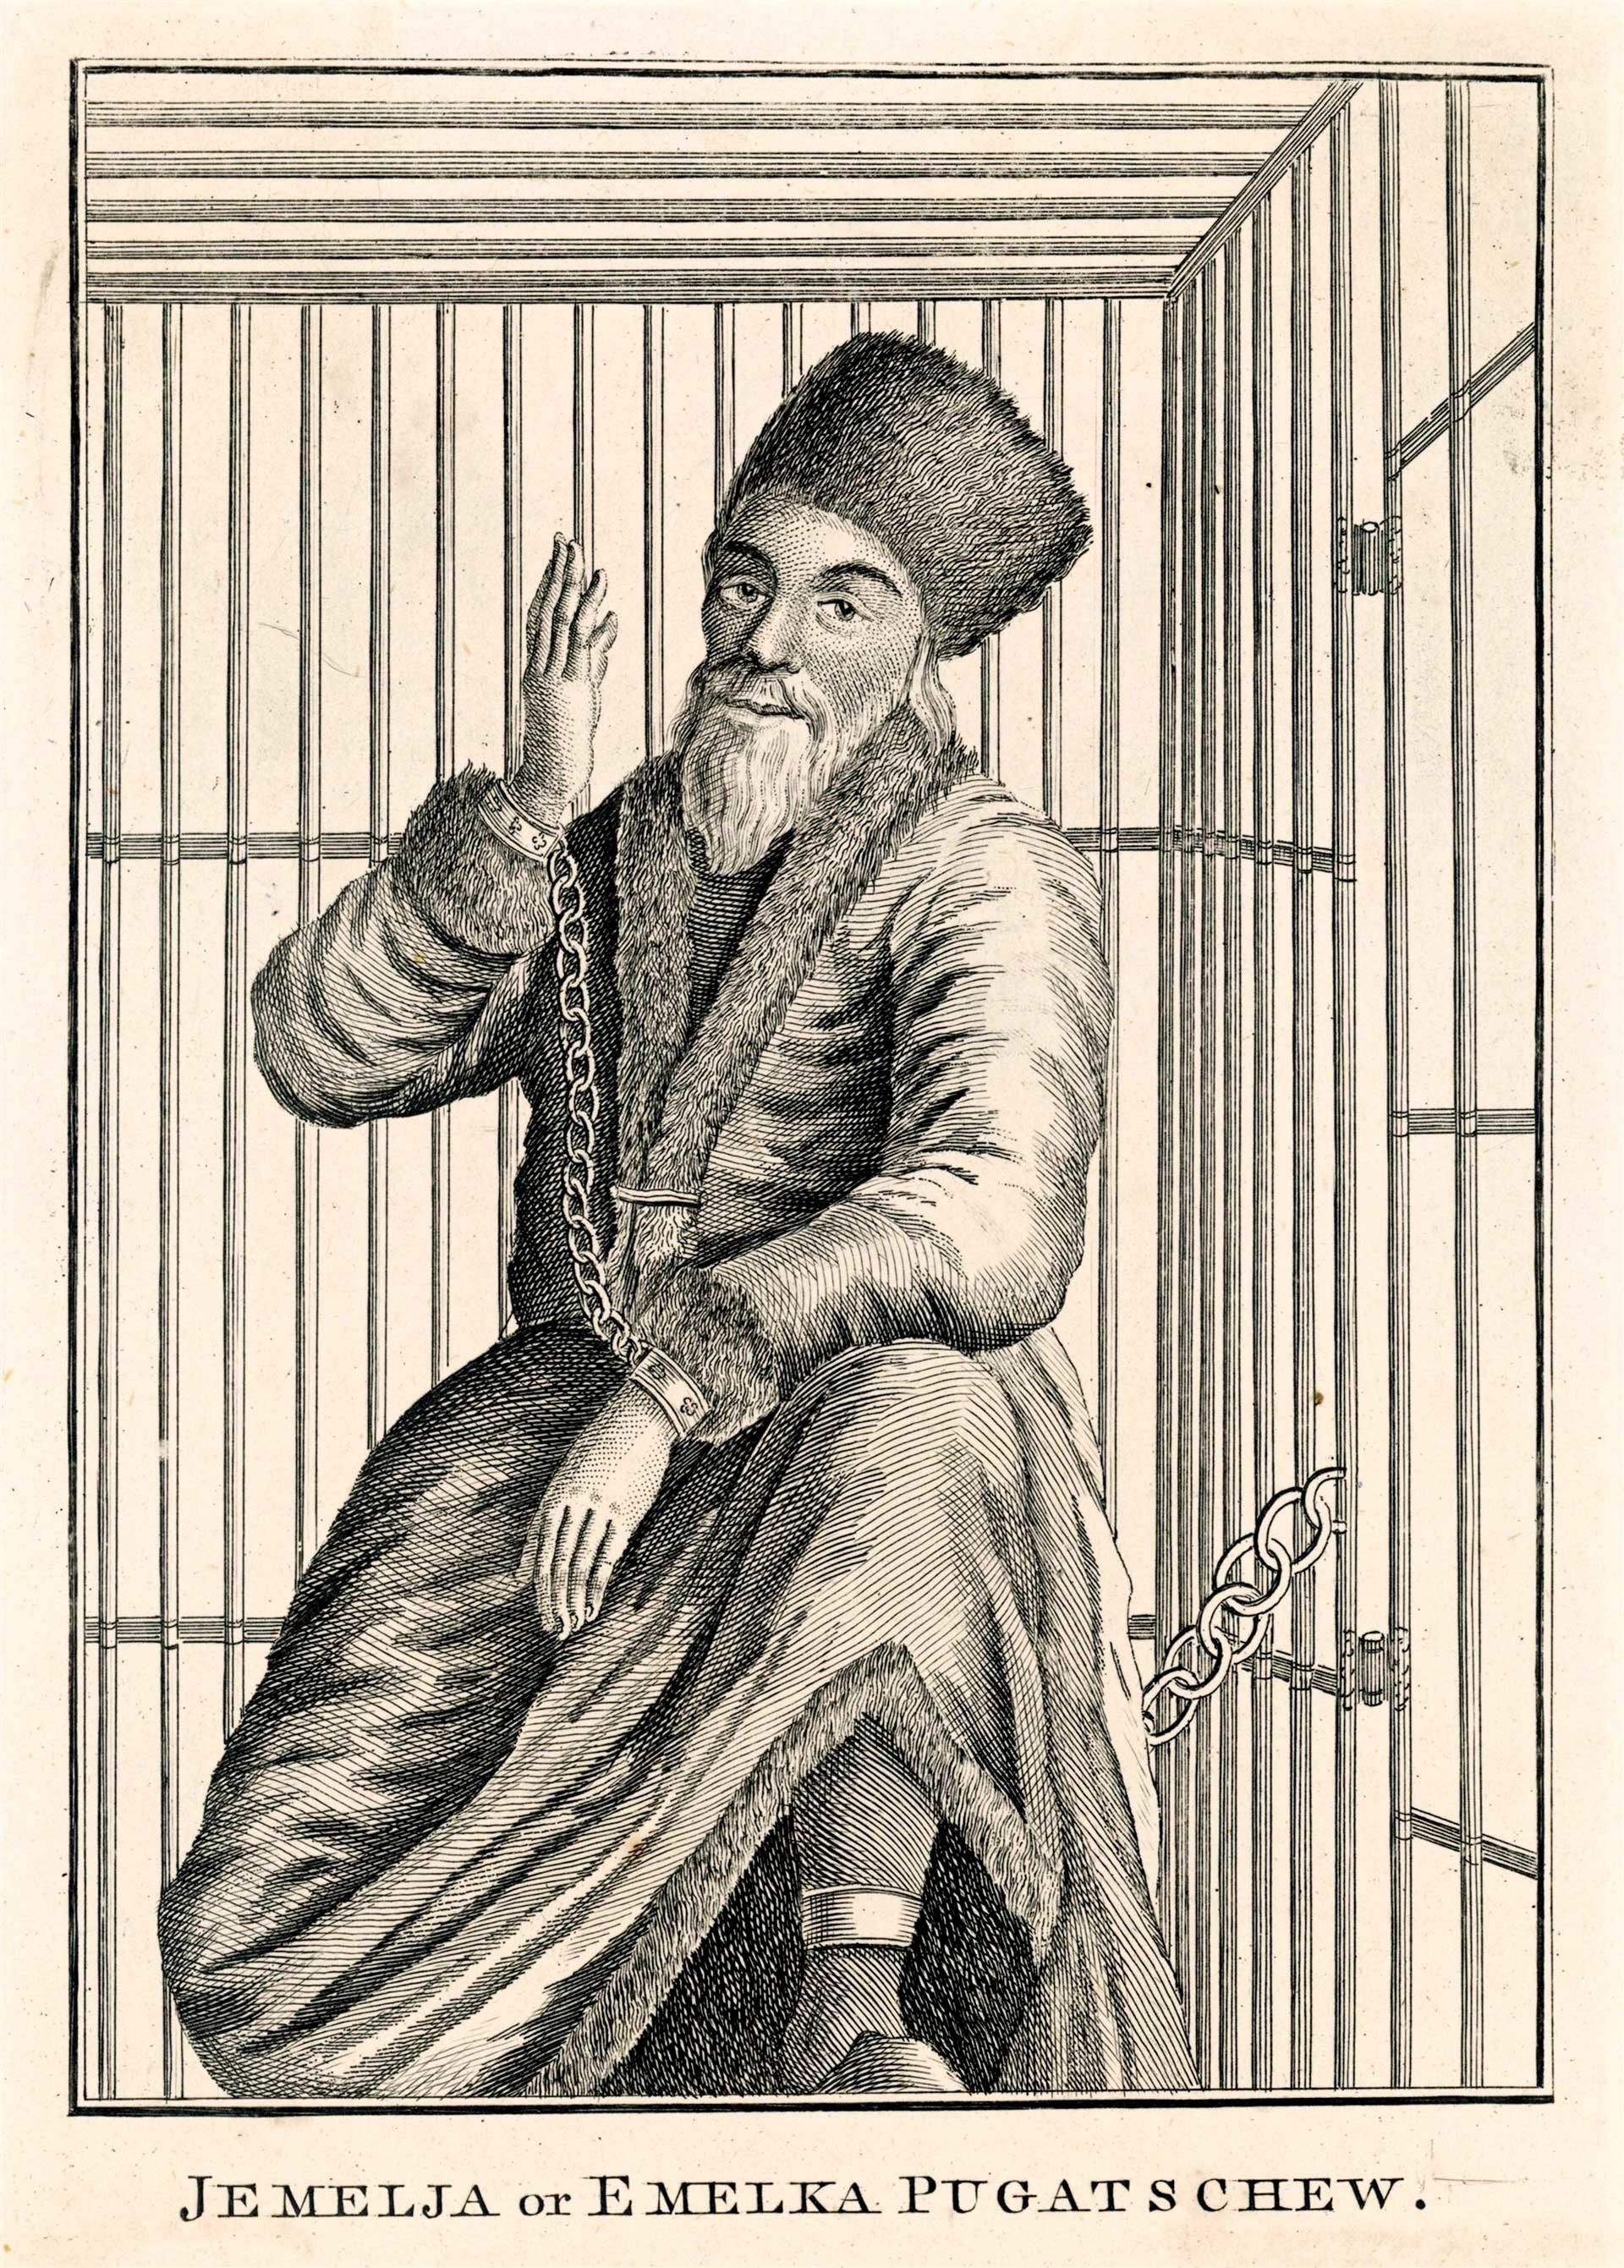 Pugachev was brought to Moscow in a wooden cage. Engraving by an unnamed artist in Caulfield's Wonderful Characters.